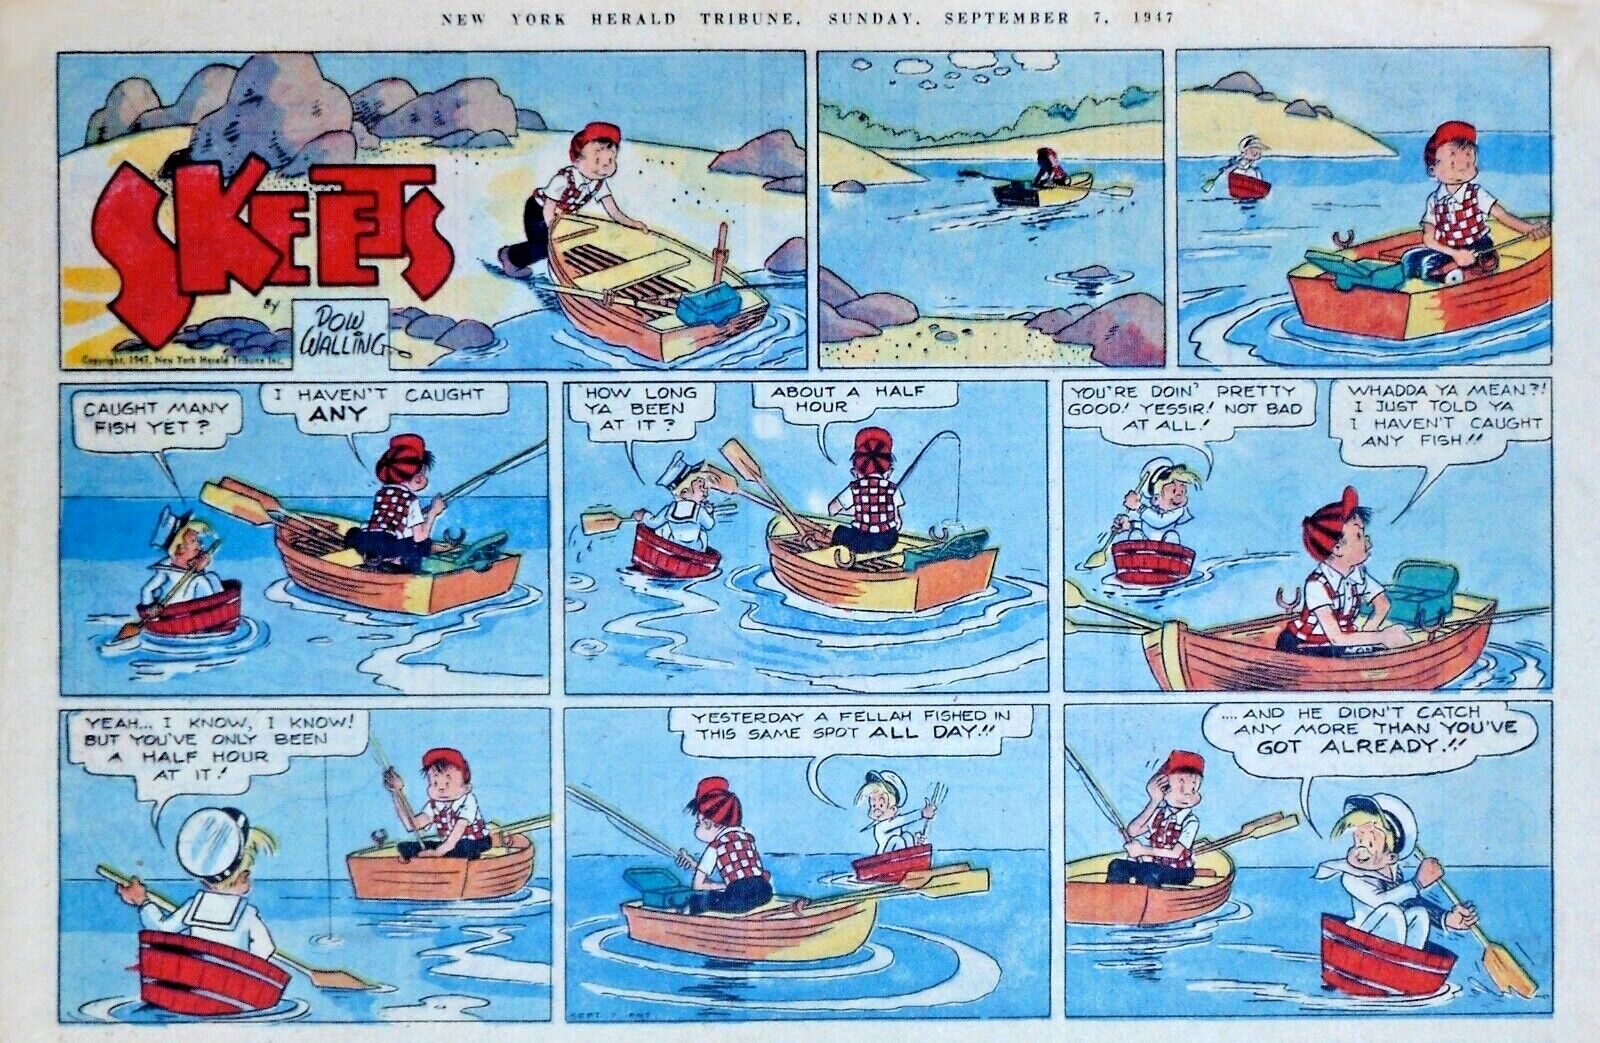 Skeets by Dow Walling - large half-page color Sunday comic - September 7, 1947